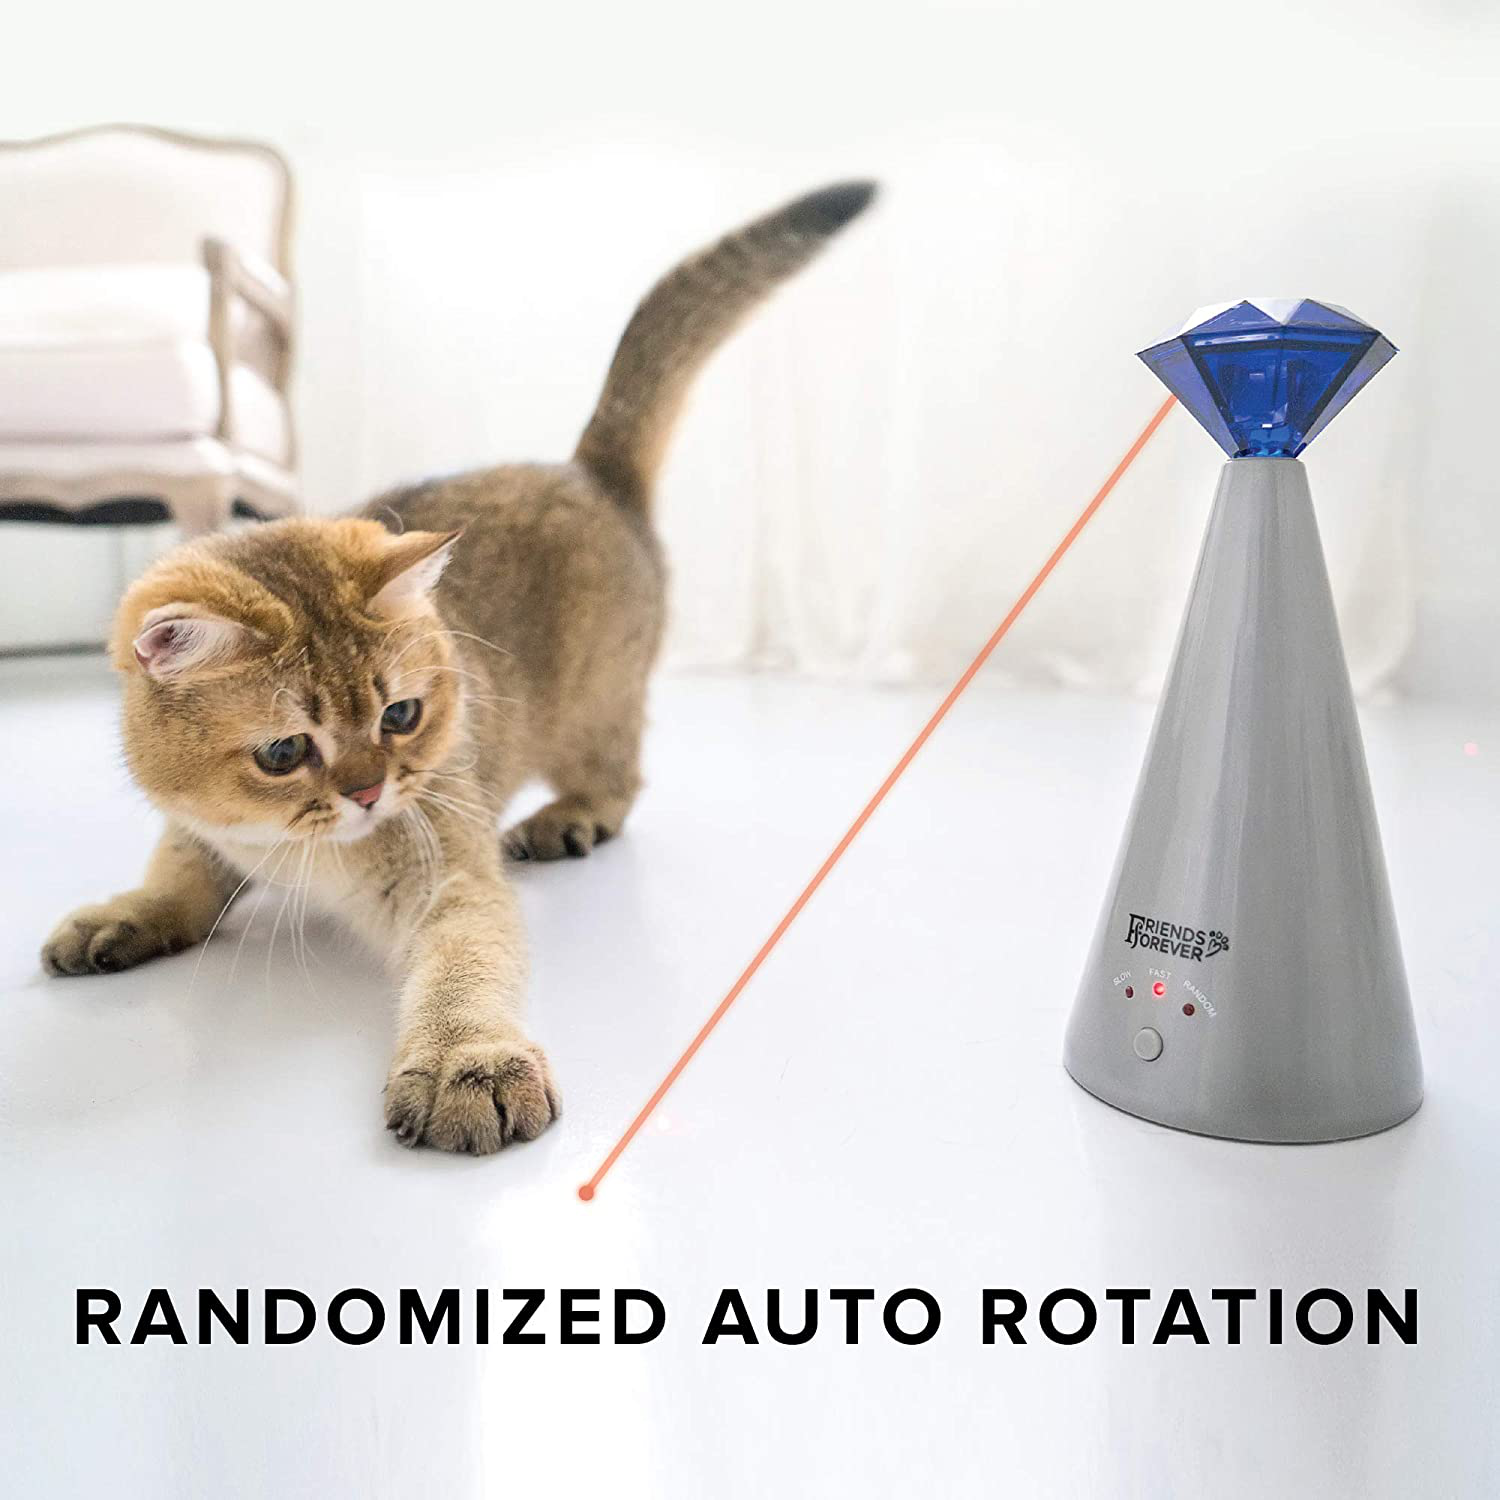 Friends Forever Interactive Laser Cat Toy - Automatic Rotating Laser Pointer for Cool Cats, Electronic Toys for Stimulating Exercise, Battery Powered Auto Lazer, 3 Speed Mode, Blue Animals & Pet Supplies > Pet Supplies > Cat Supplies > Cat Toys Friends Forever   